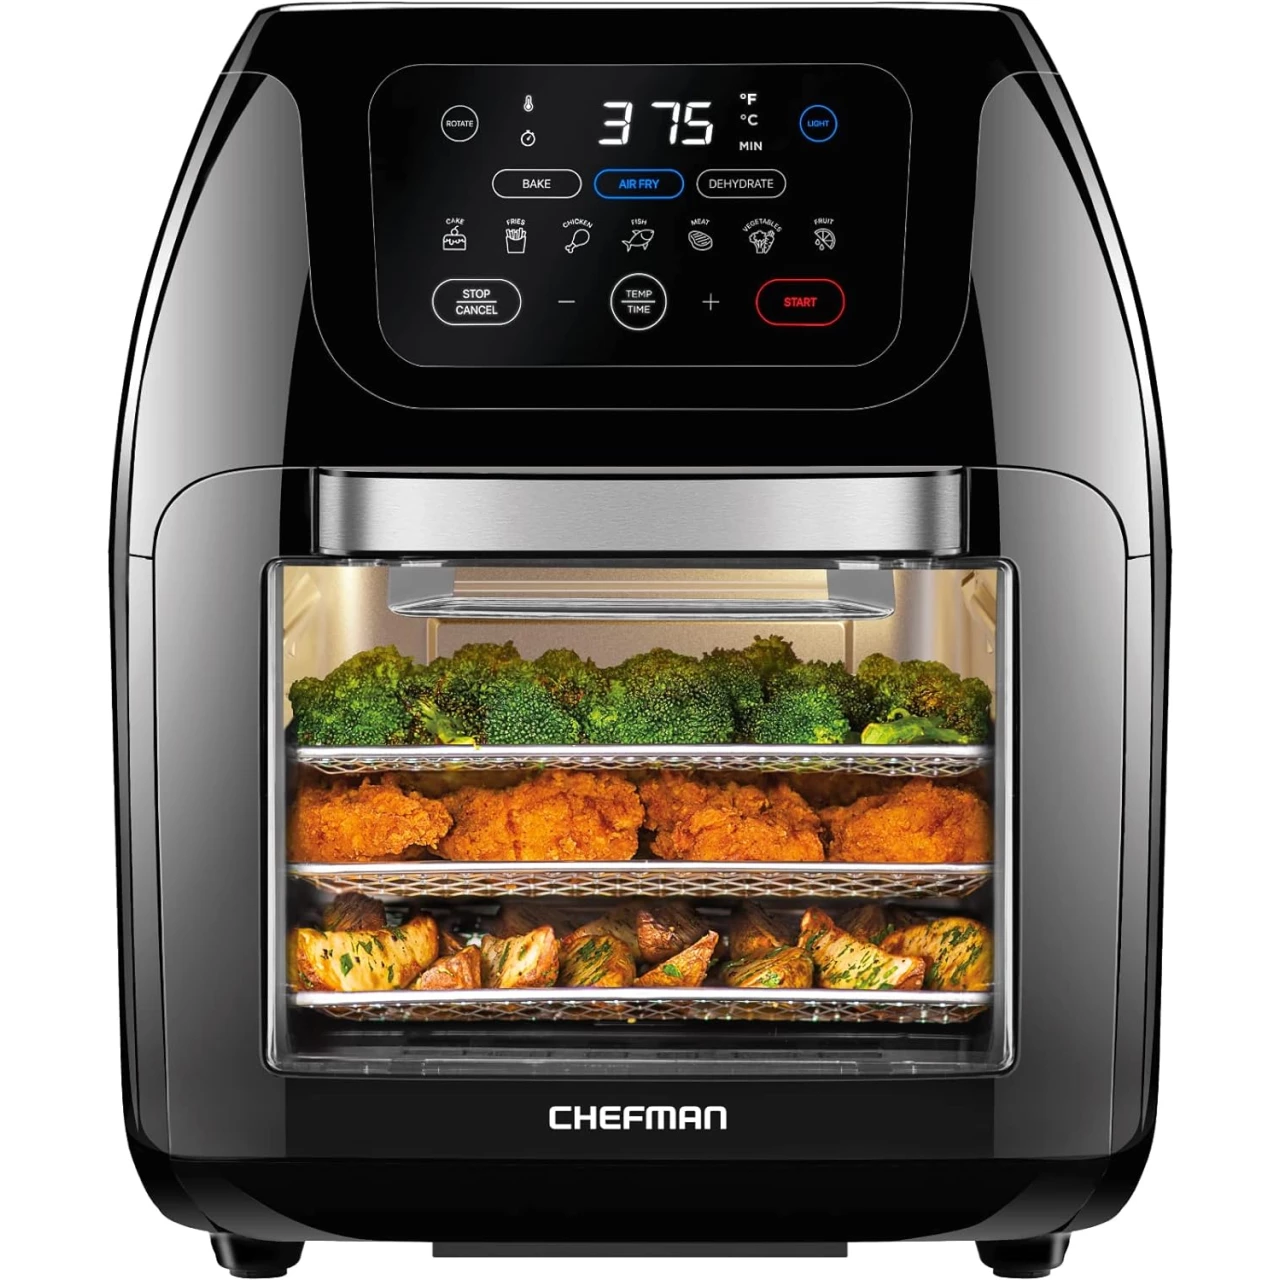 CHEFMAN Multifunctional Digital Air Fryer+ Rotisserie, Dehydrator, Convection Oven, 17 Touch Screen Presets